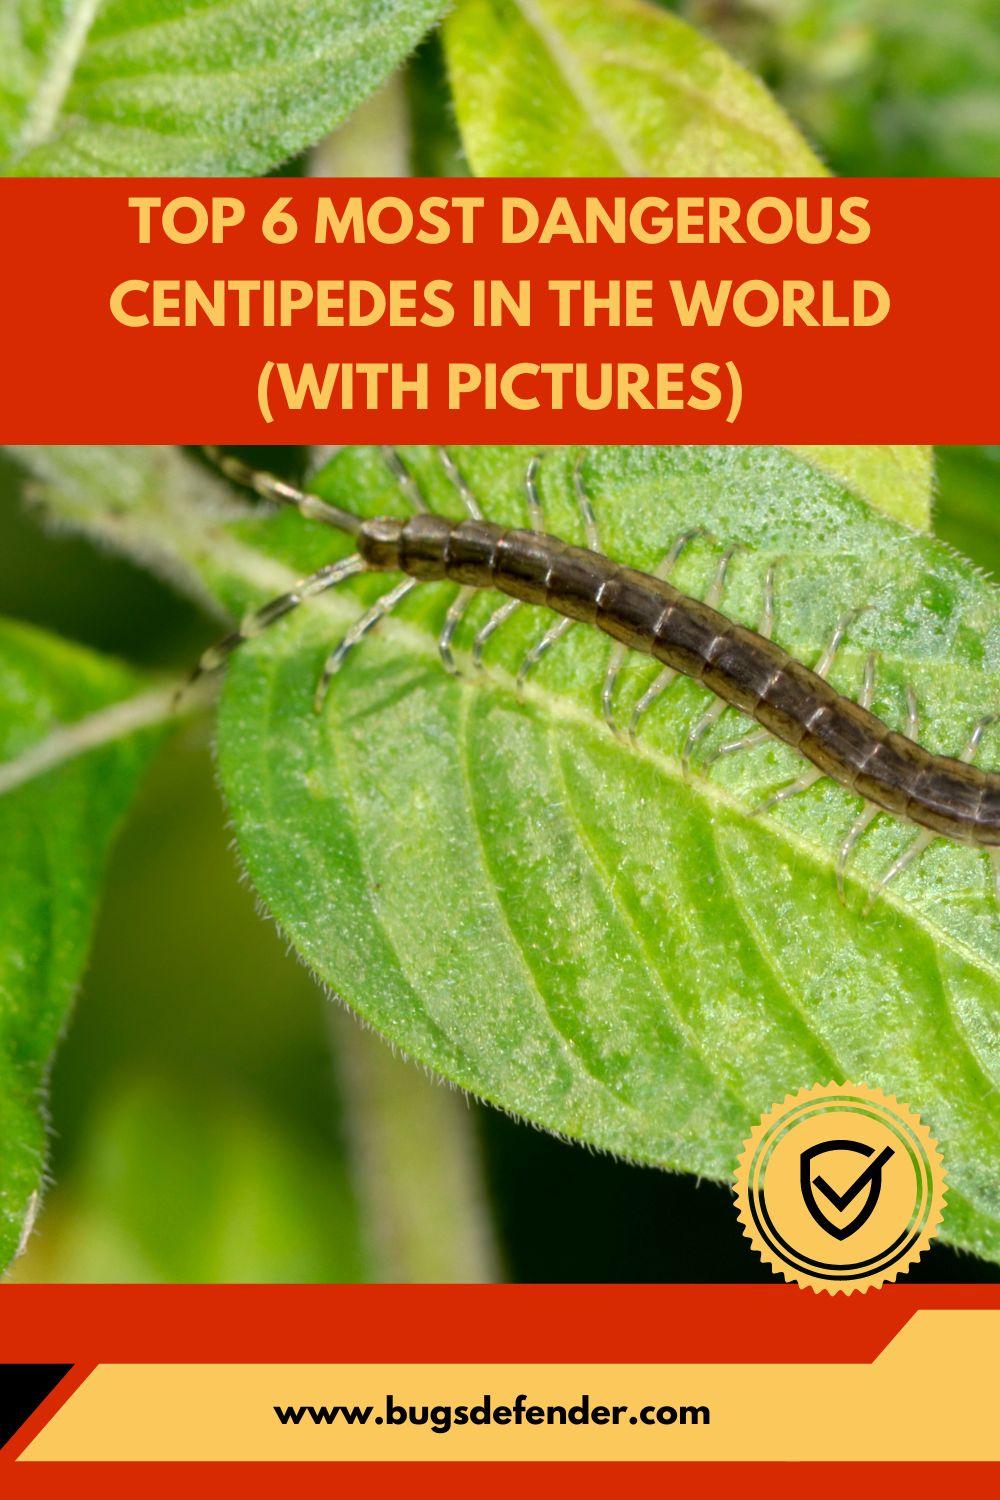 Top 6 Most Dangerous Centipedes in the World pin1